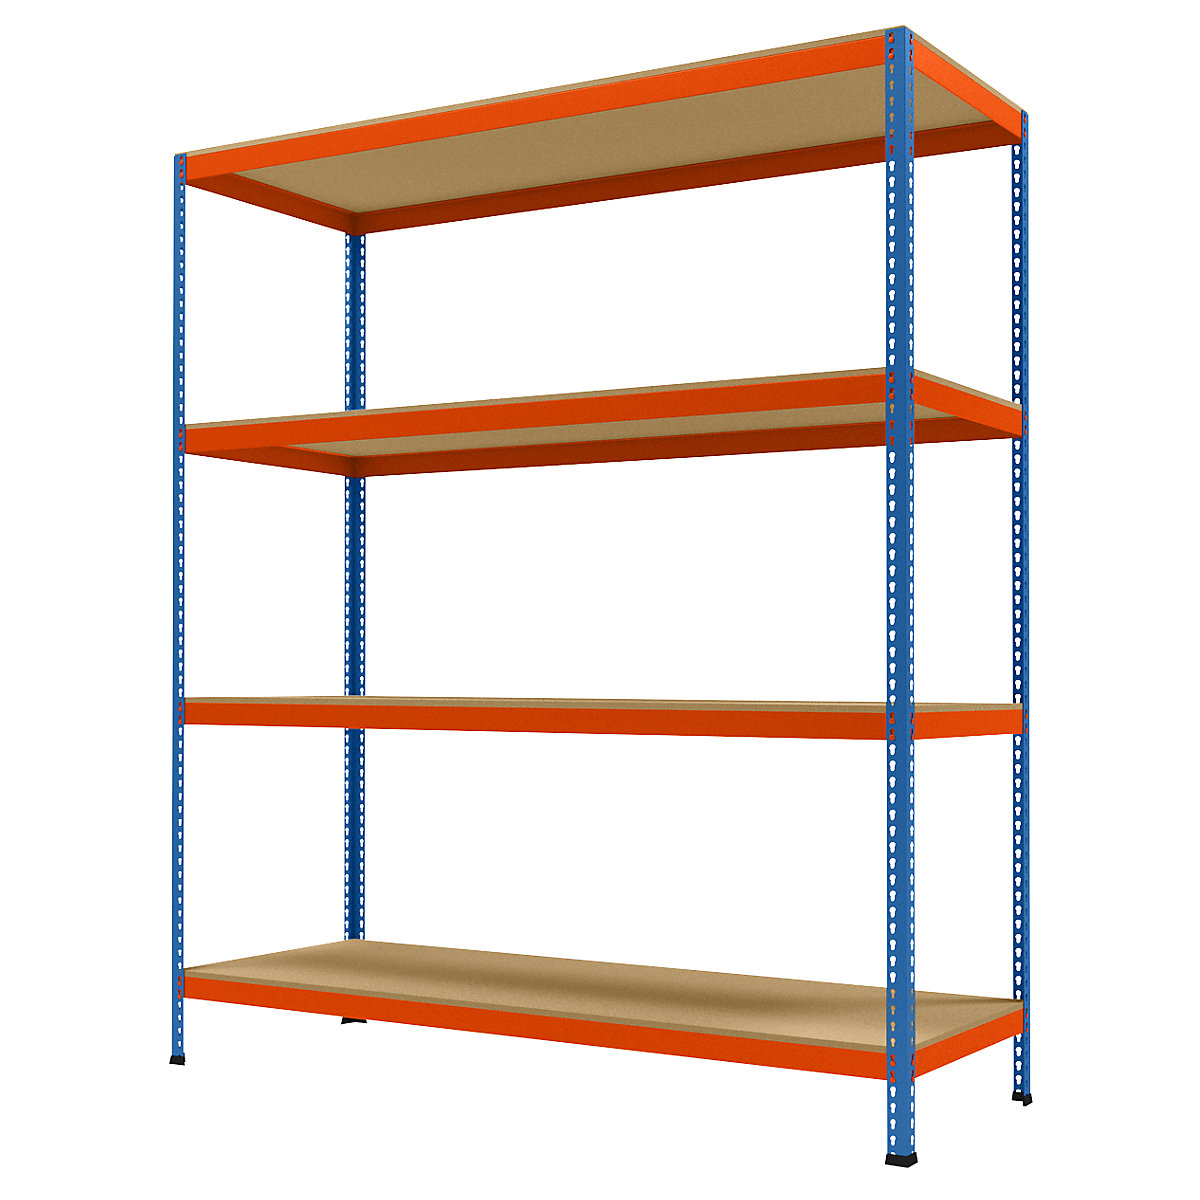 Wide span heavy duty shelving, height 2438 mm, overall depth 773 mm, width 2146 mm